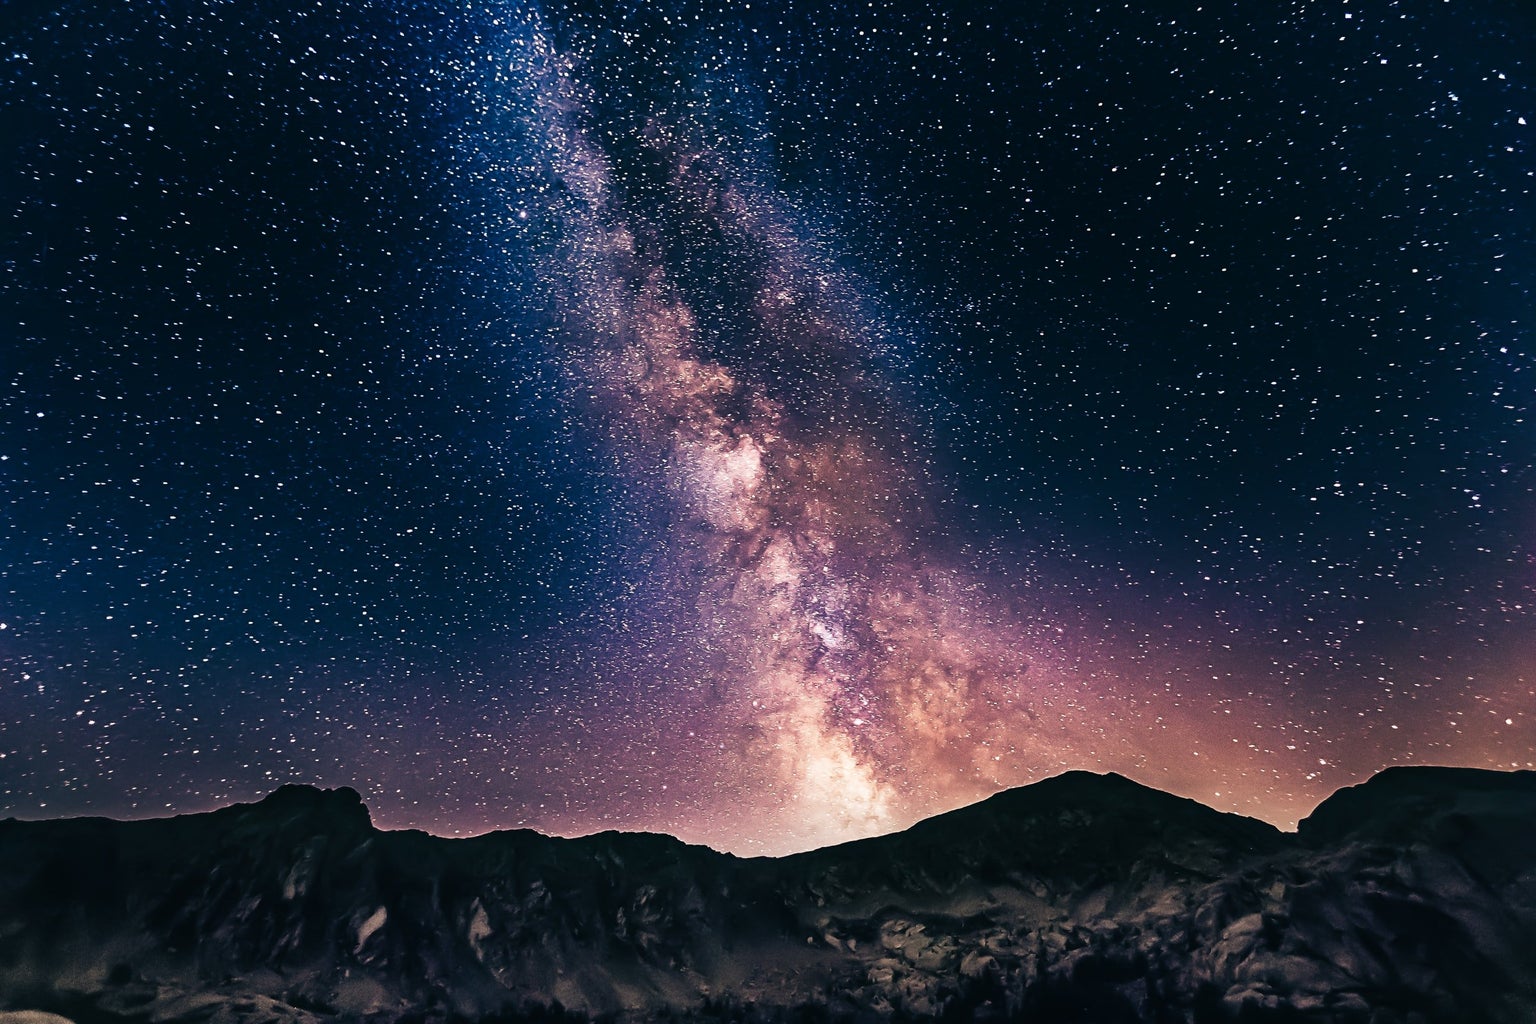 Galaxy of Stars behind mountains